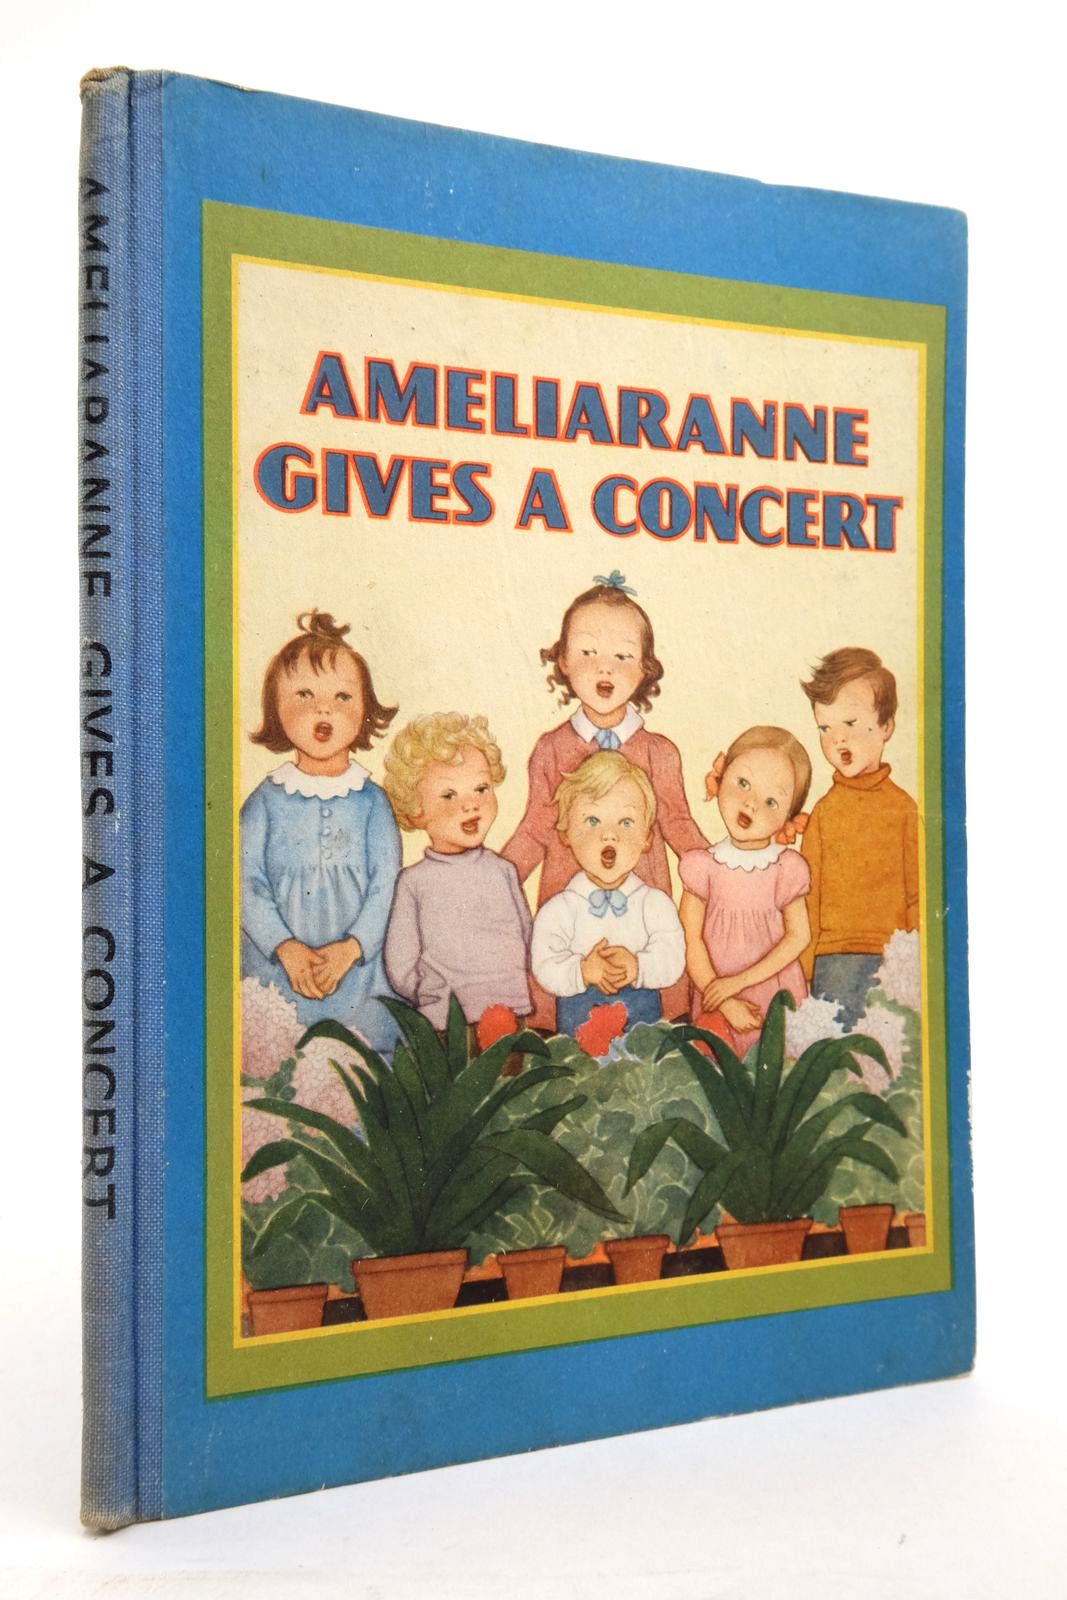 Photo of AMELIARANNE GIVES A CONCERT written by Gilmour, Margaret illustrated by Pearse, S.B. published by George G. Harrap &amp; Co. Ltd. (STOCK CODE: 2137182)  for sale by Stella & Rose's Books